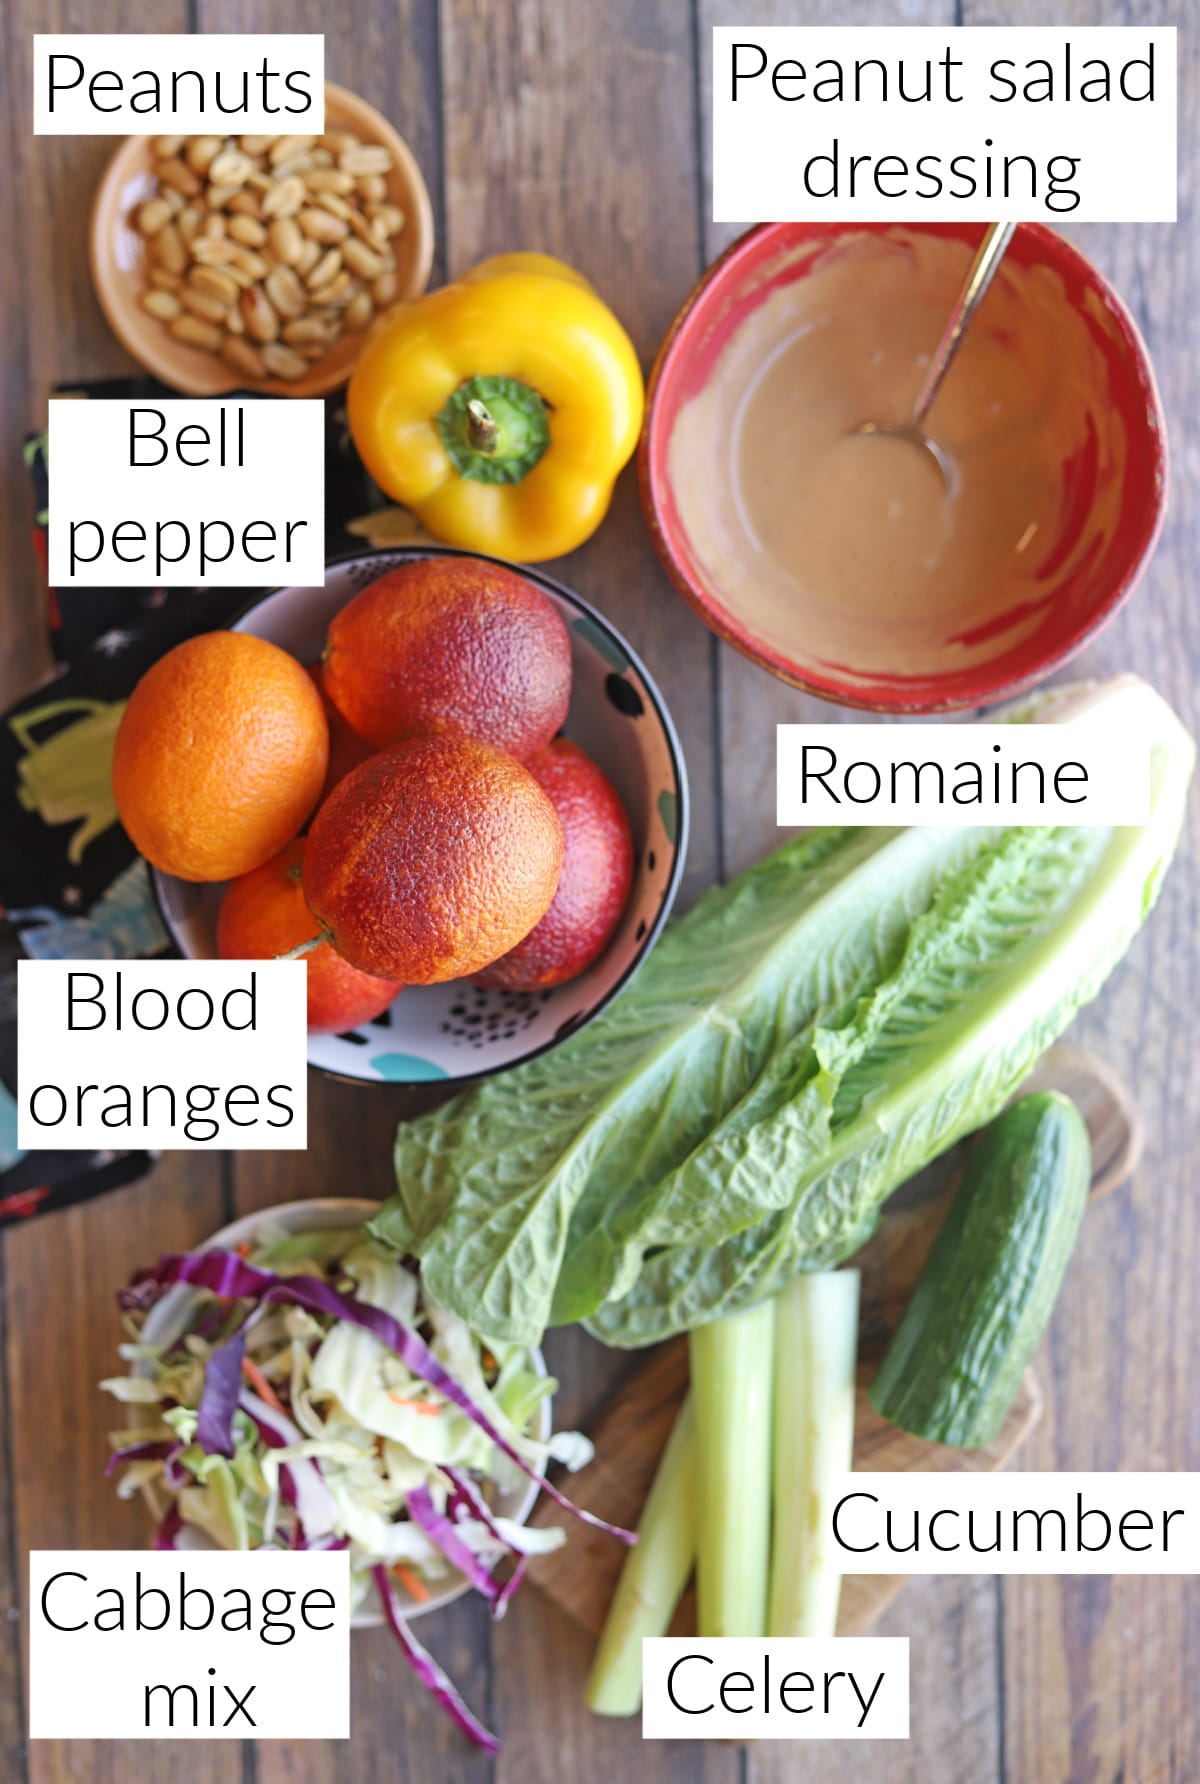 Labeled ingredients for salad with blood oranges & peanut dressing.